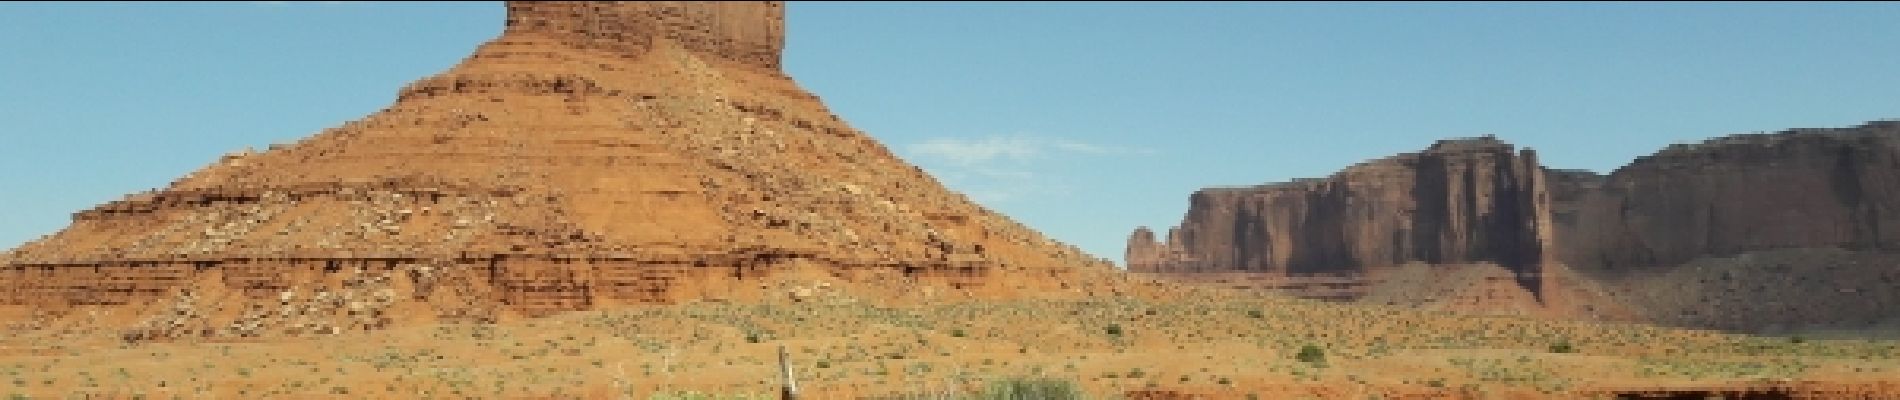 Trail Walking Unknown - monument valley - Photo